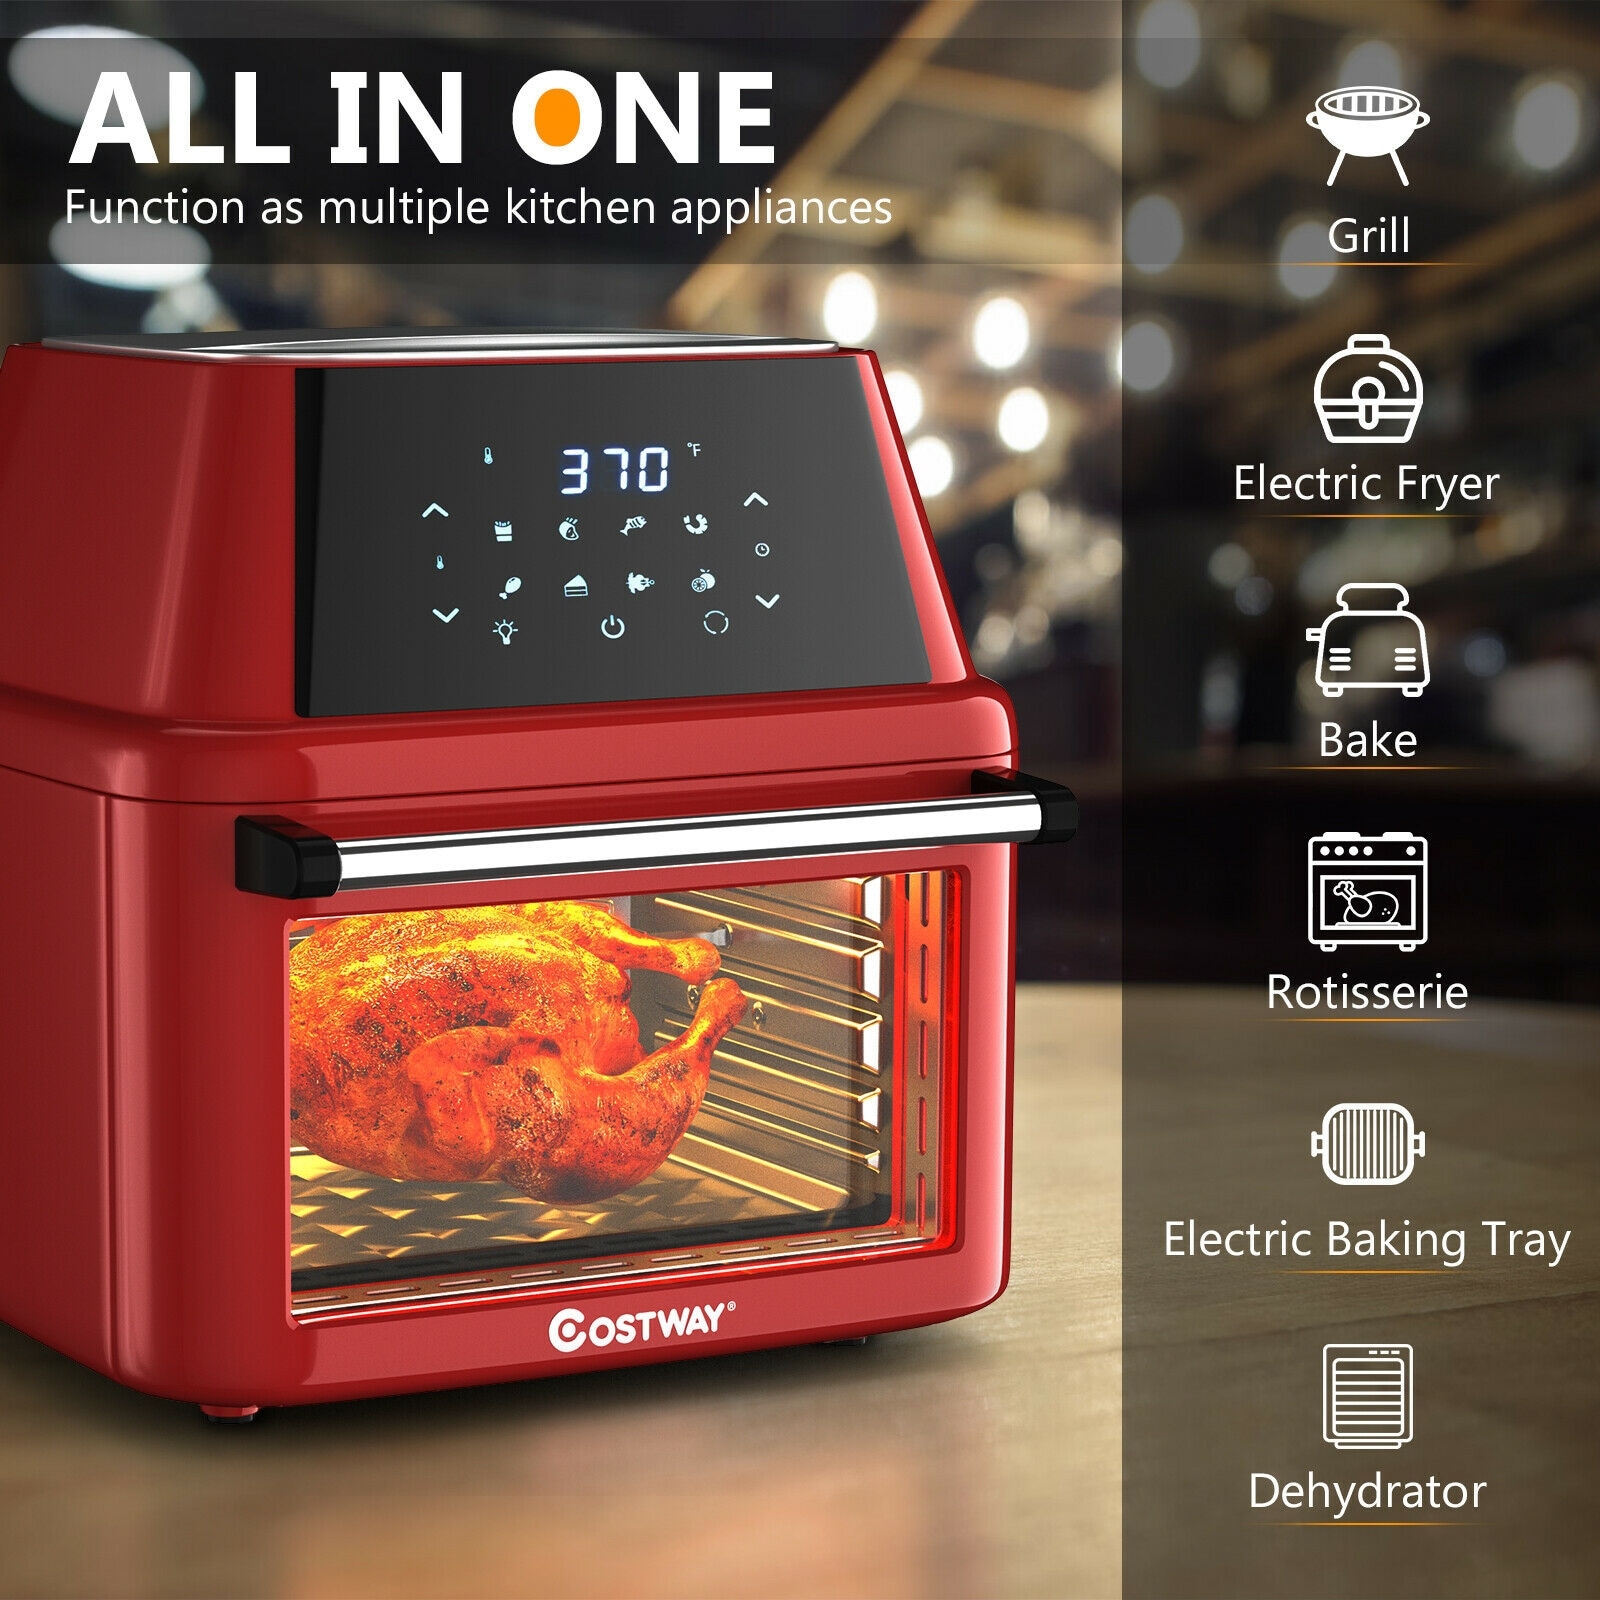 Home Kitchen All in one Red Toaster Ovens Appliances Dining Bar Cooking  Food Fit